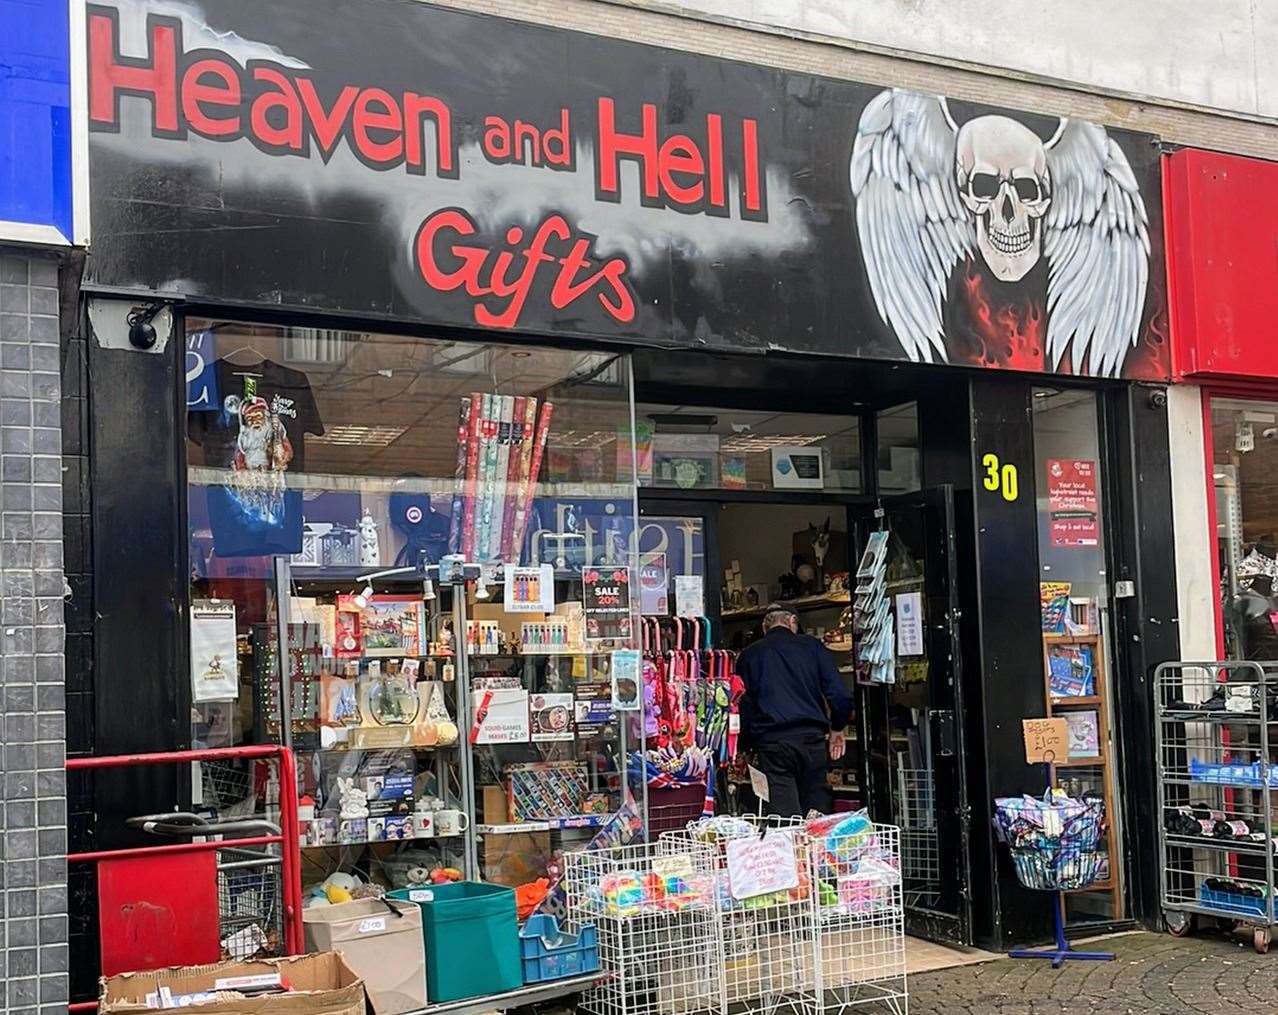 Brady's shop on the high street. Pic: Heaven and Hell Gifts (60003787)